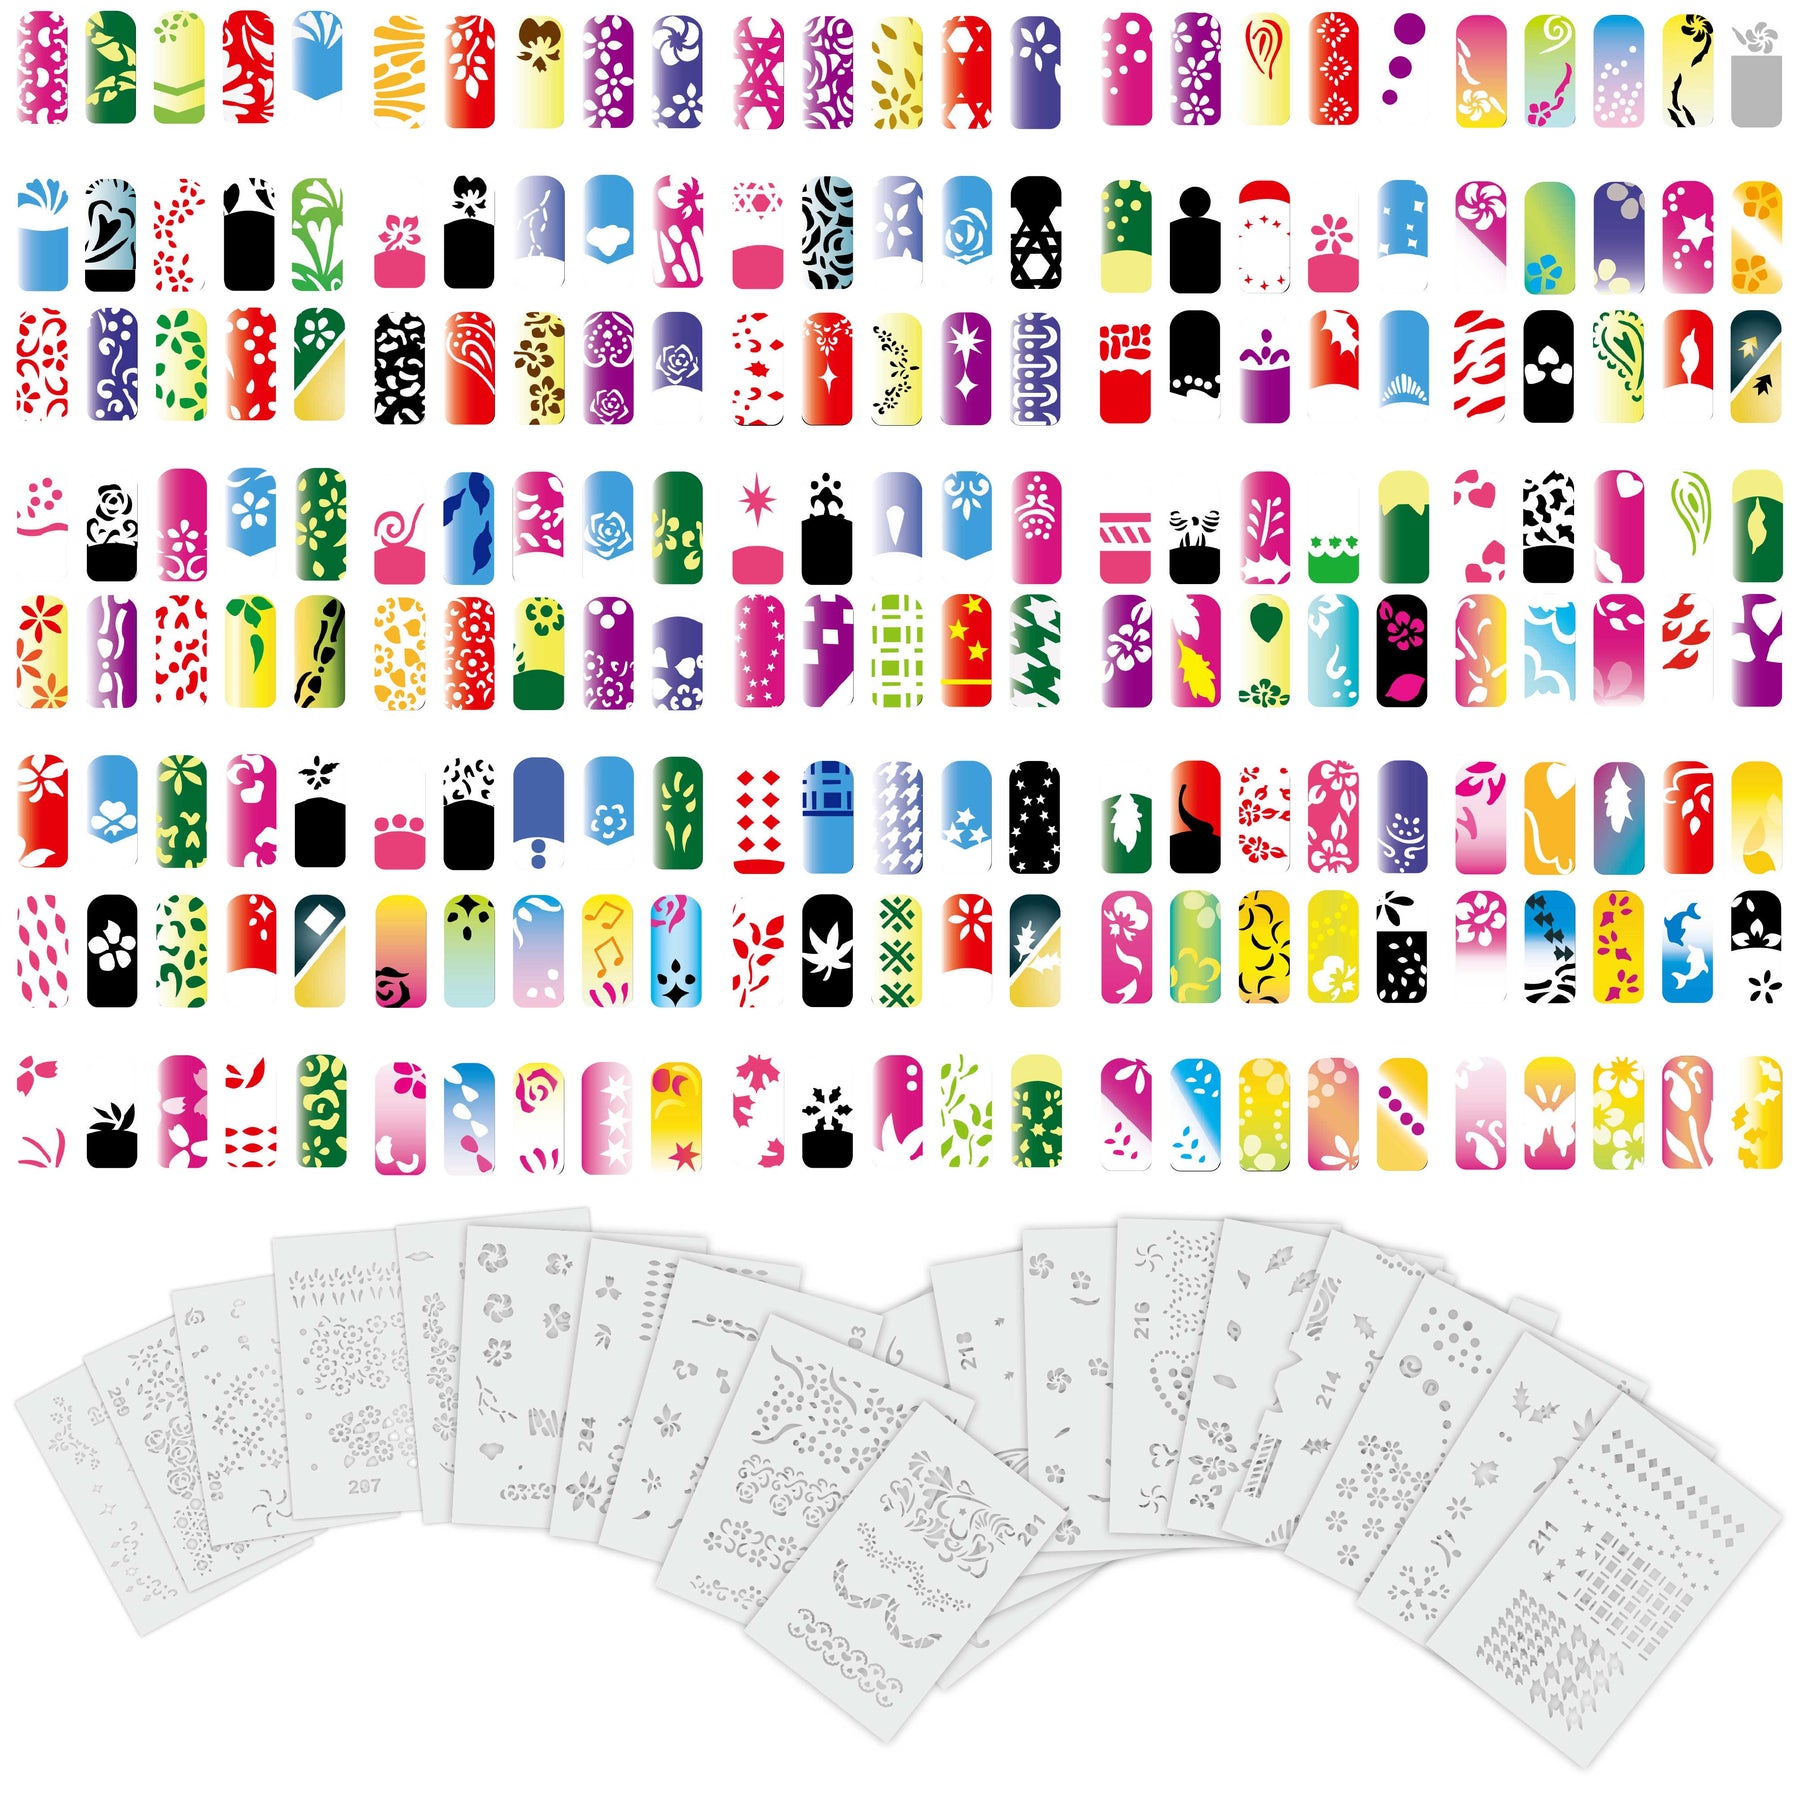 Custom Body Art Airbrush Nail Stencils - Design Series Set # 2 includes 20  Individual Nail Templates with 16 Designs 